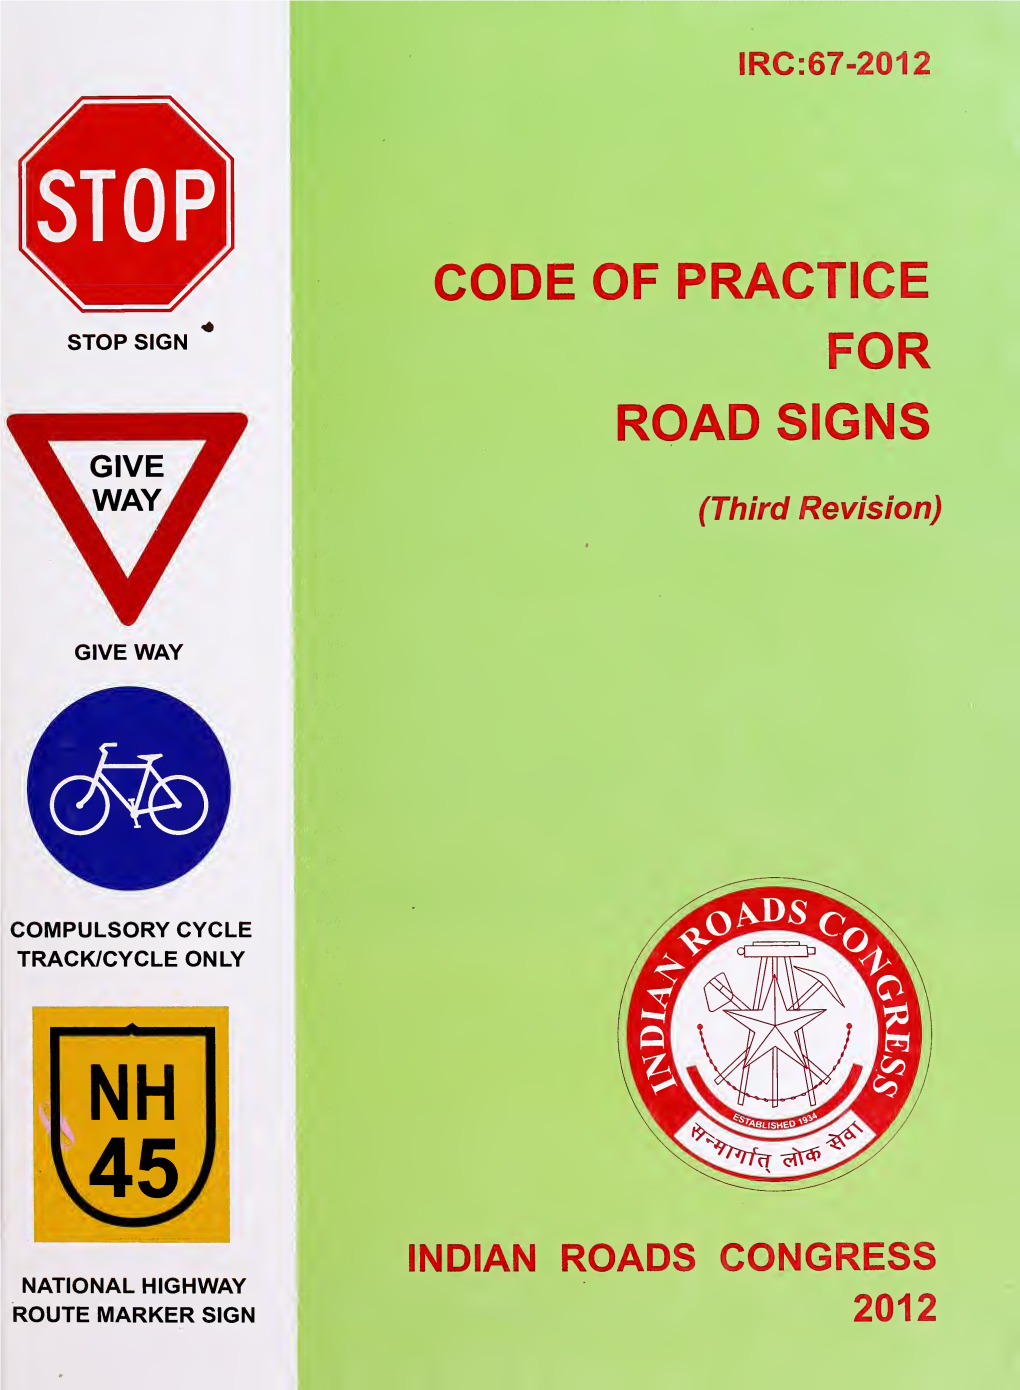 IRC 067: Code of Practice for Road Signs (Third Revision)